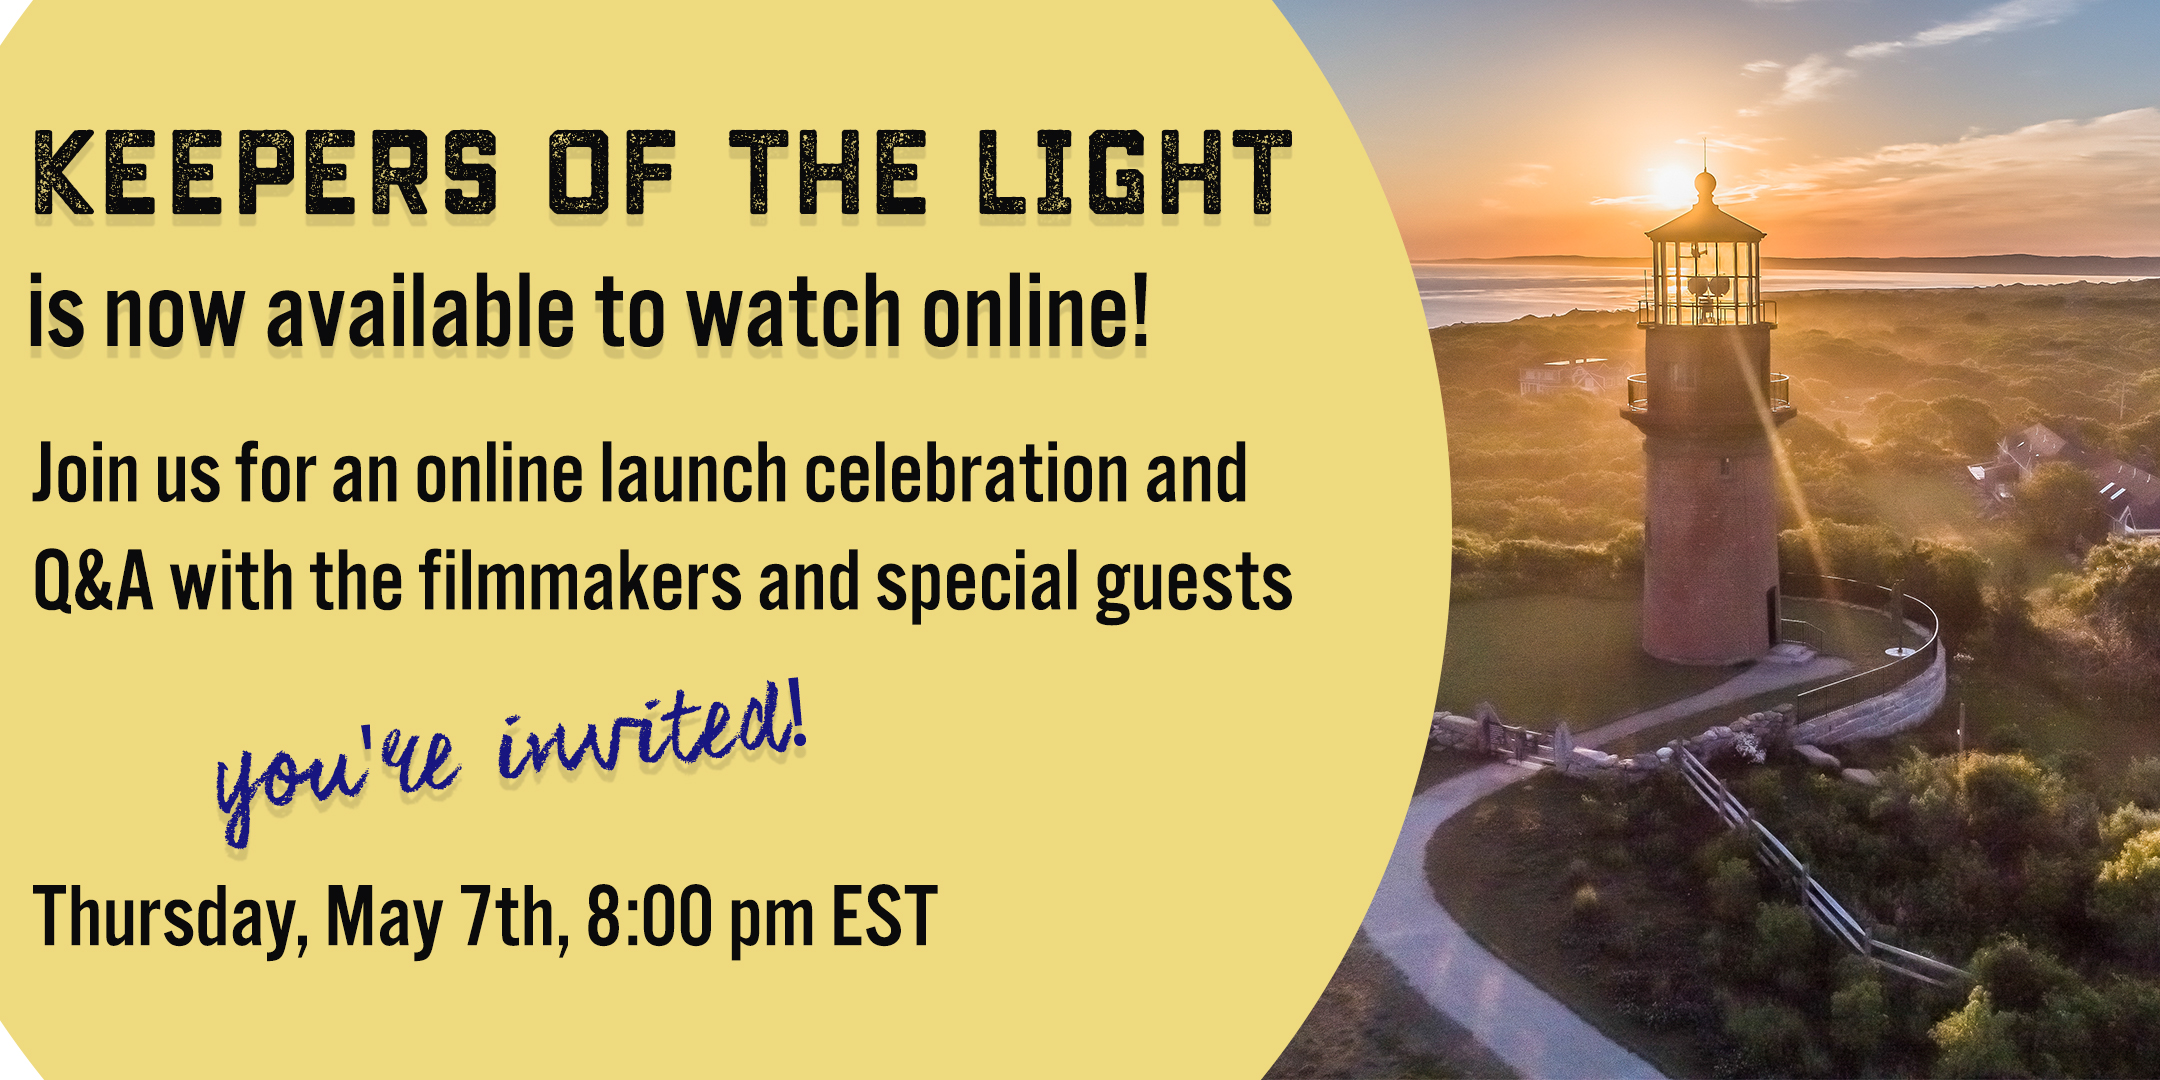 KEEPERS OF THE LIGHT Online Launch Celebration and Q&A with filmmakers and special guests 5/7